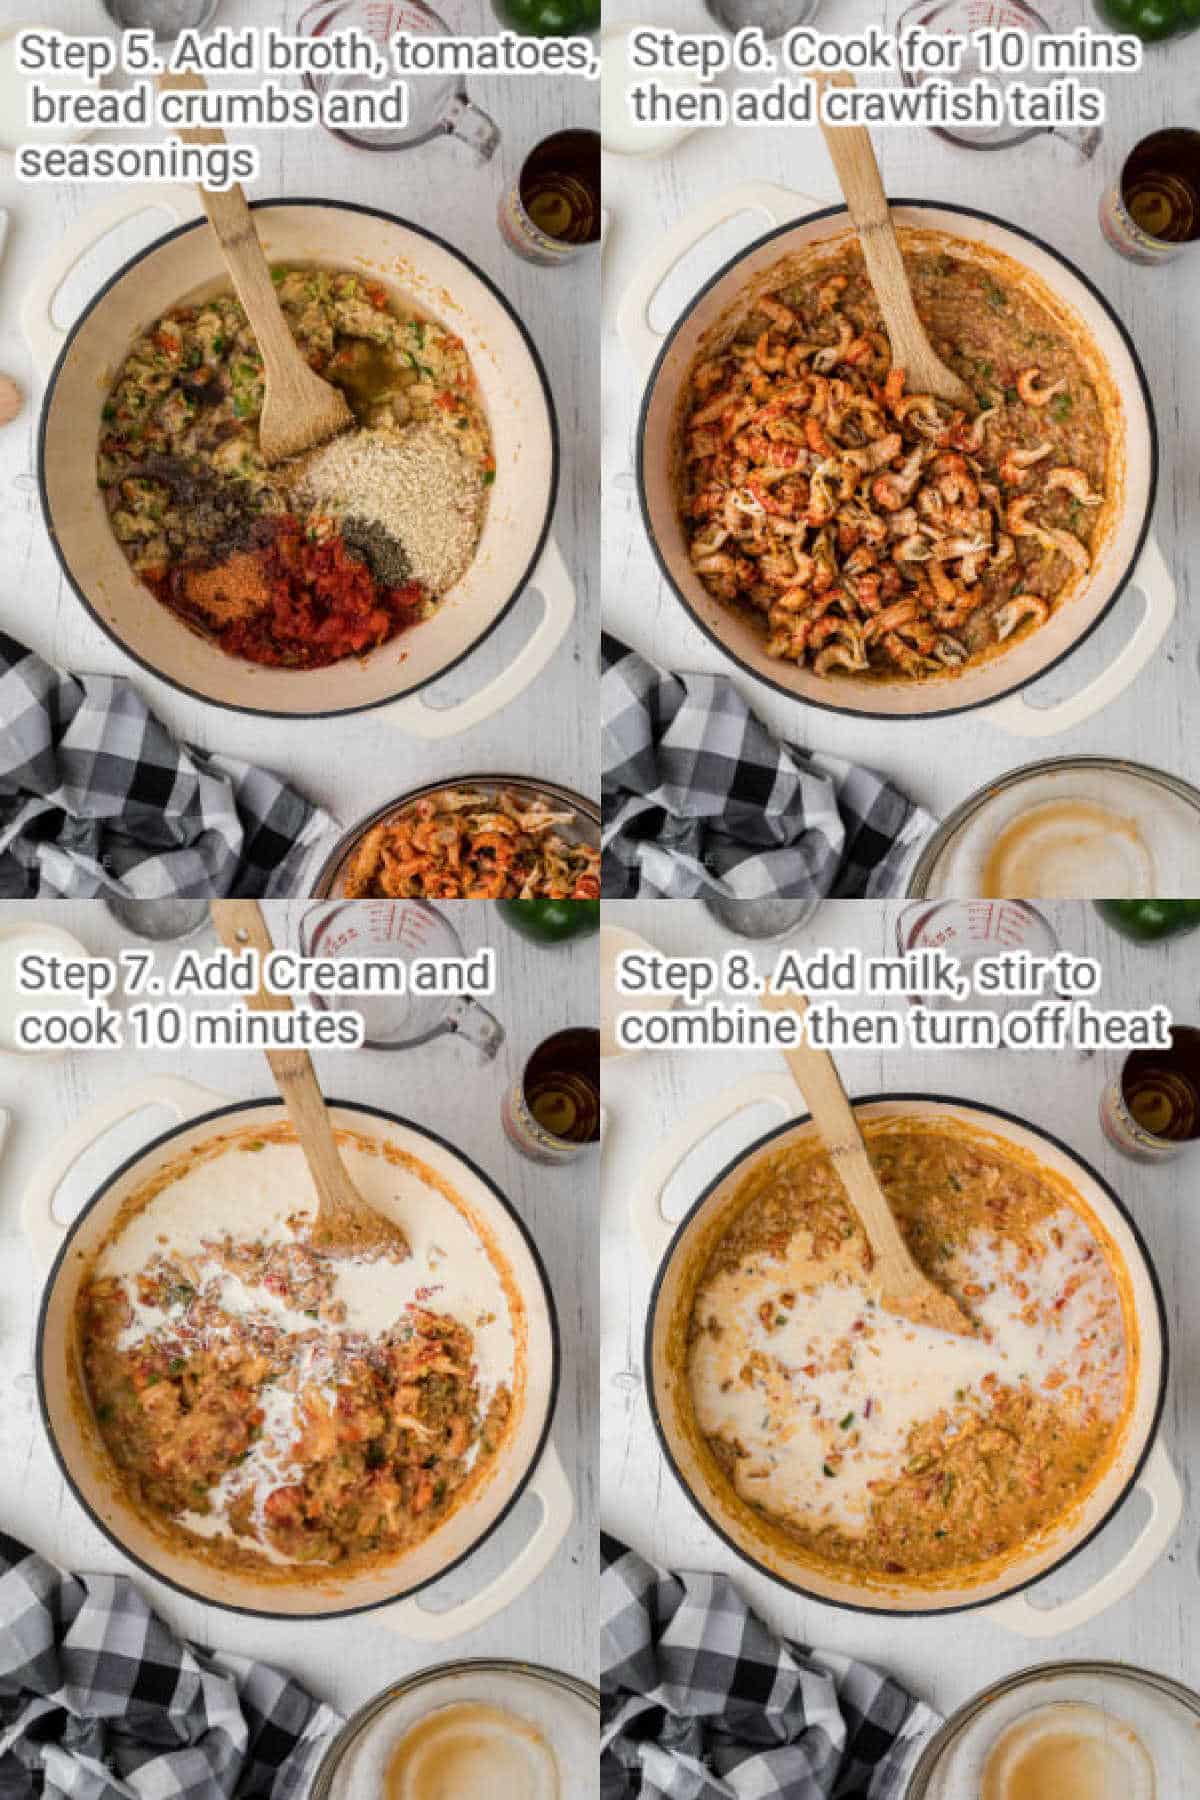 crawfish pie recipe steps 5-8 four images of how to make a crawfish pie